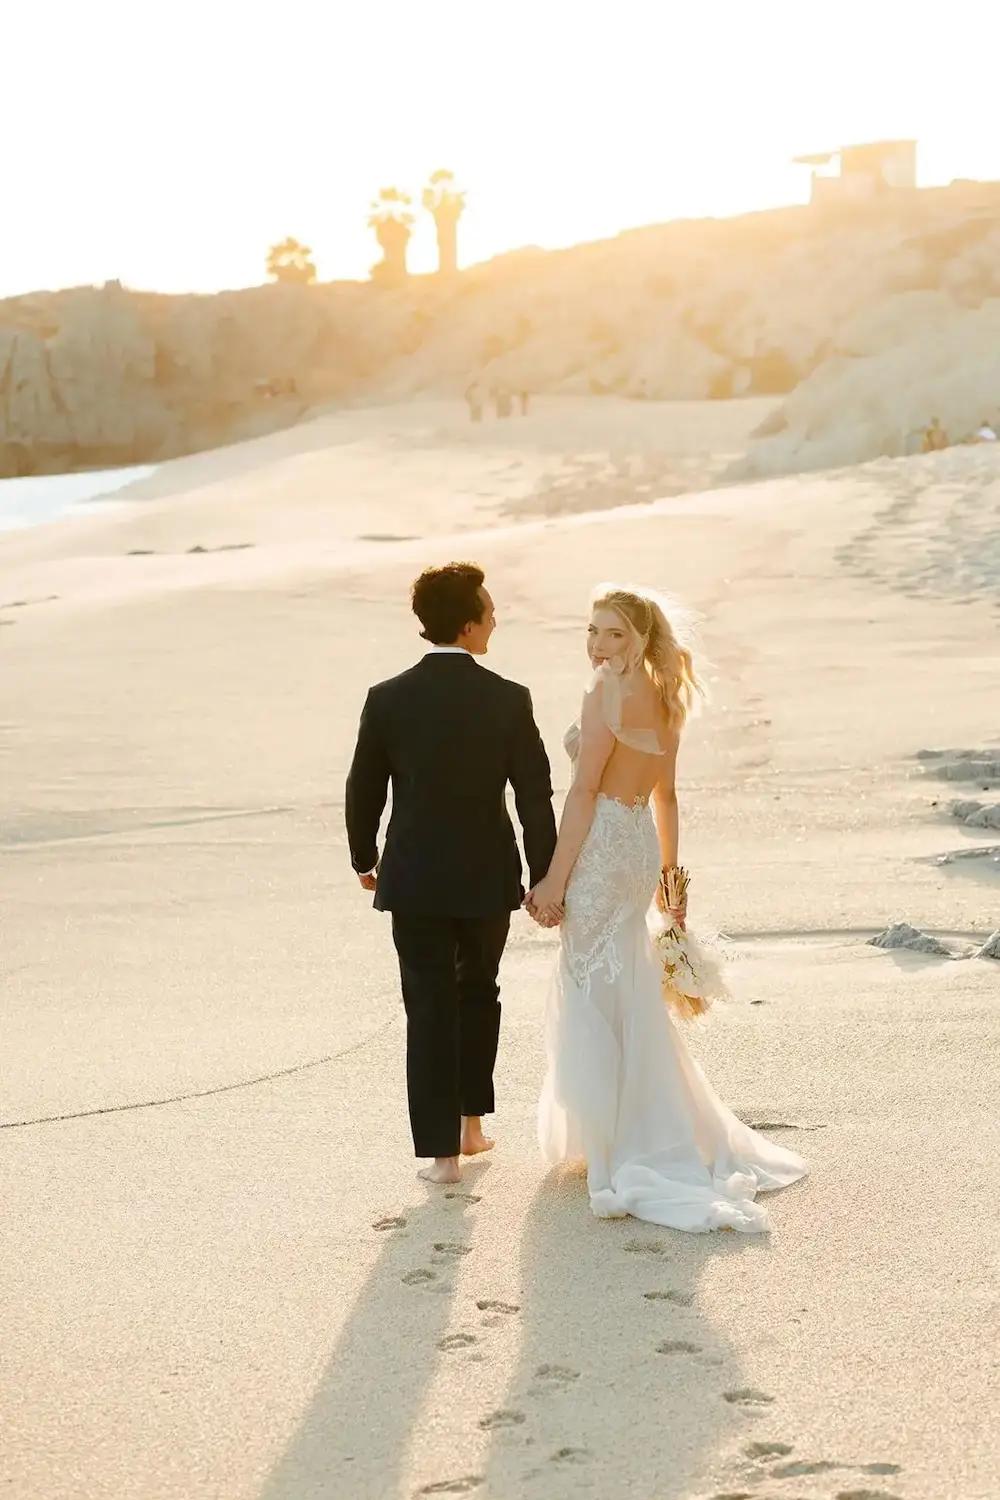 Erica Wears Lace Fit &amp; Flare Bridal Dress for Destination Beach Wedding in Cabo. Desktop Image